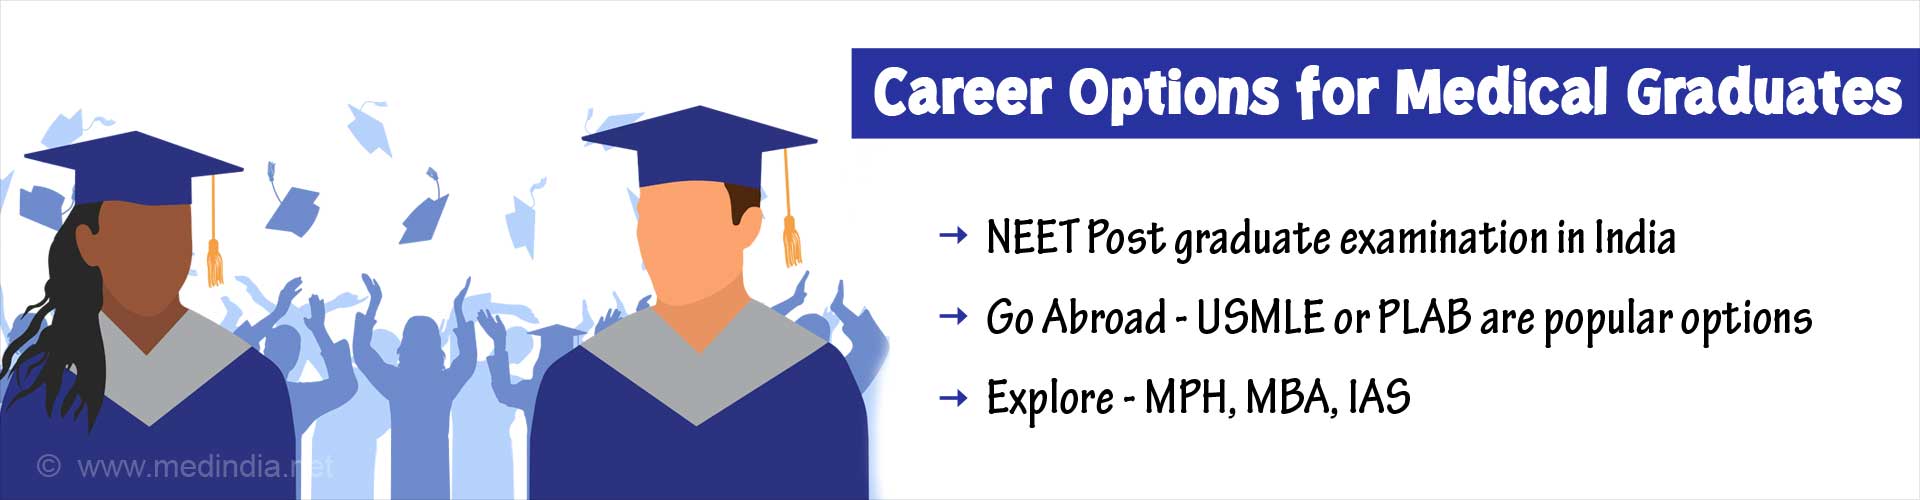 What’s NEXT? - After your primary medical degree like MBBS or MD?